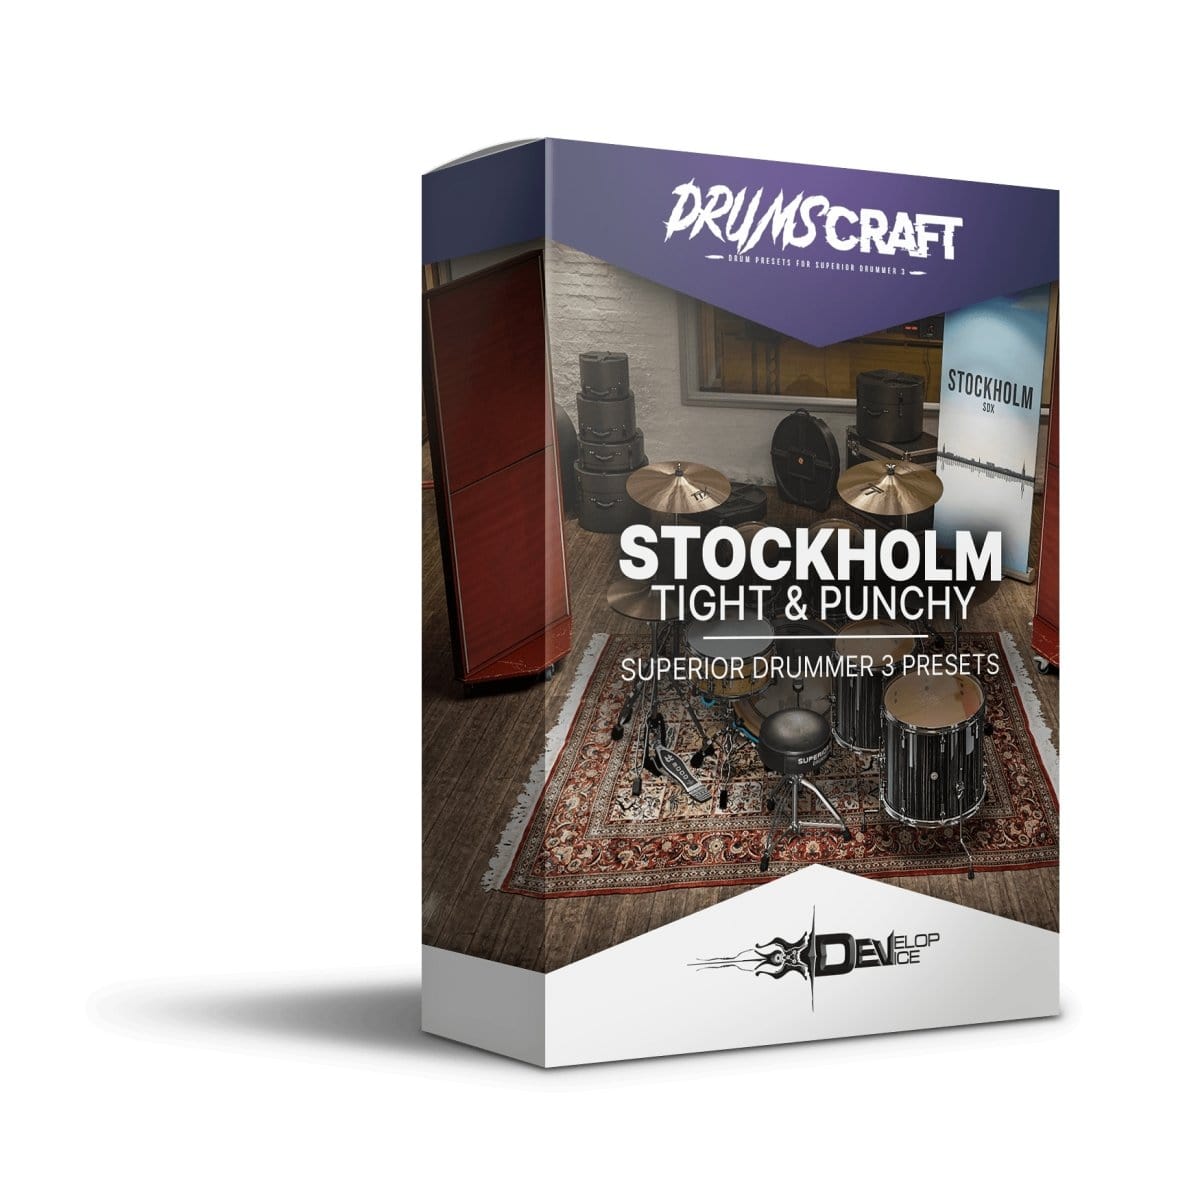 Stockholm Tight & Punchy - Superior Drummer 3 Presets by Develop Device